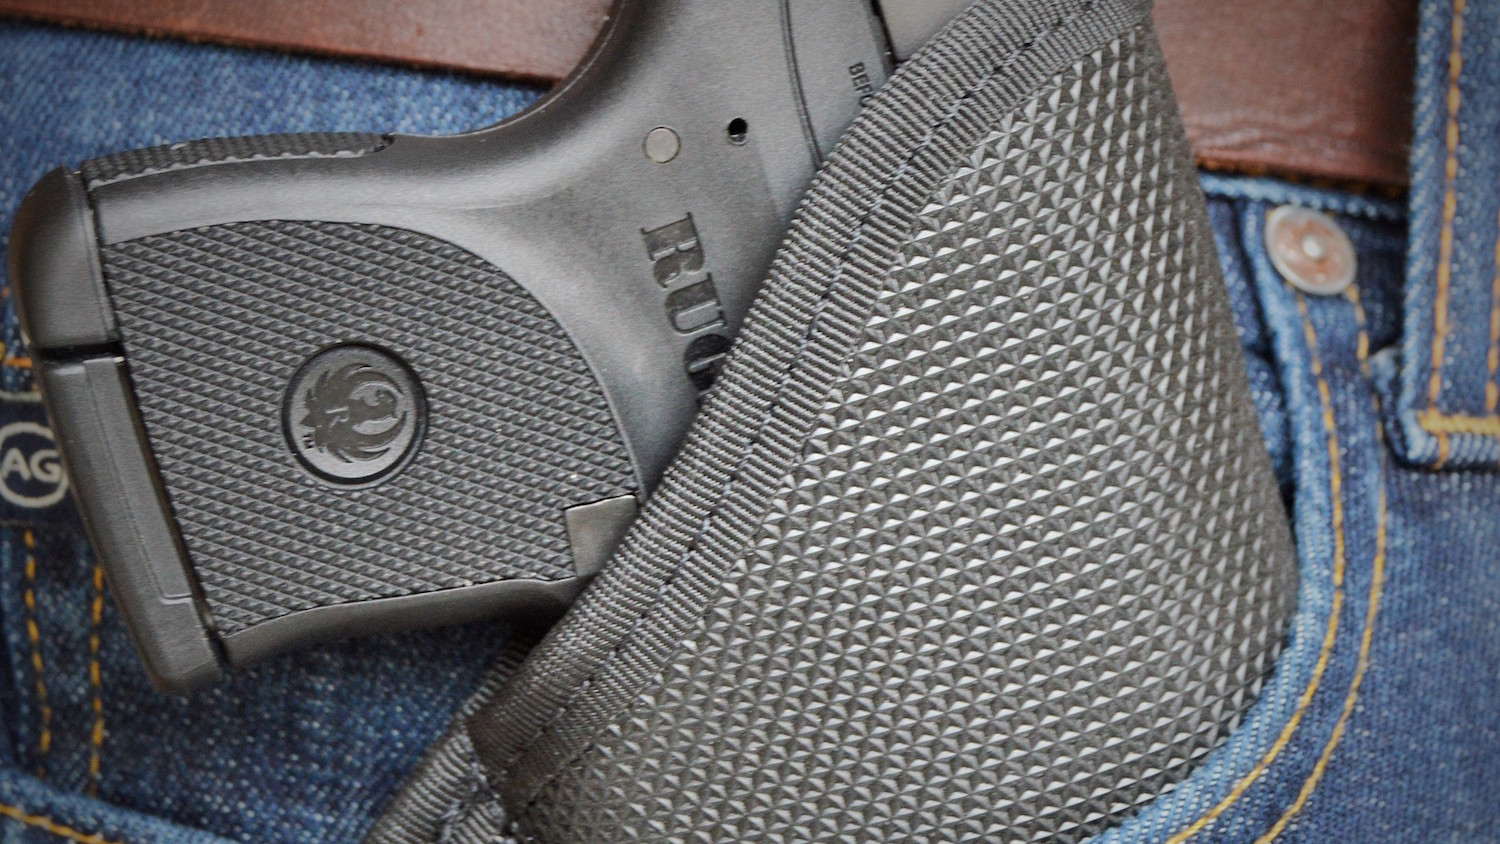 Five Pocket Holsters For Your Concealed Carry Pistol